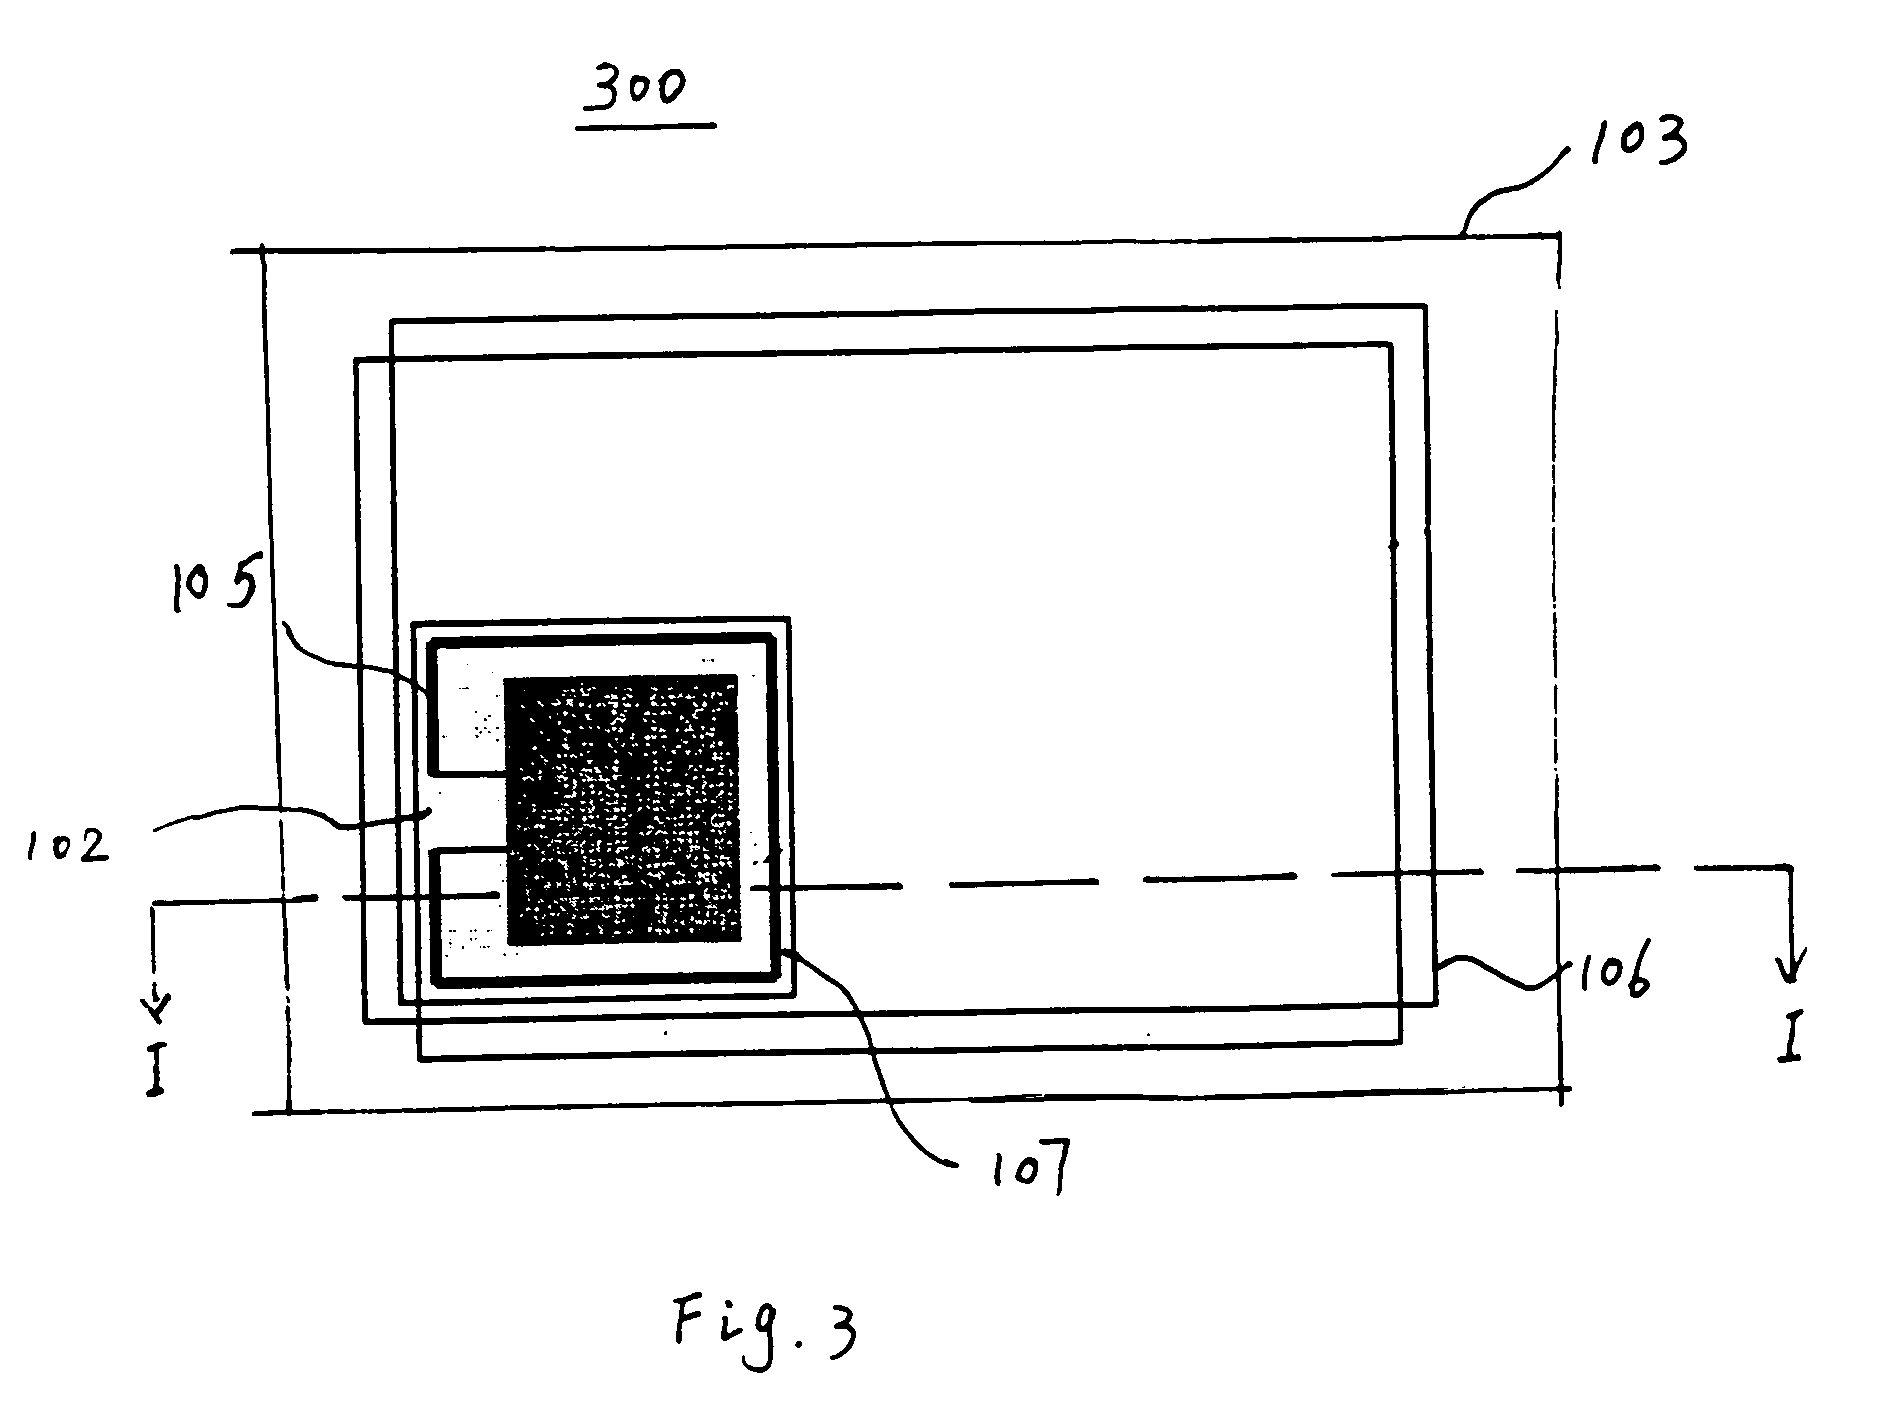 Radio frequency identification tag having an inductively coupled antenna